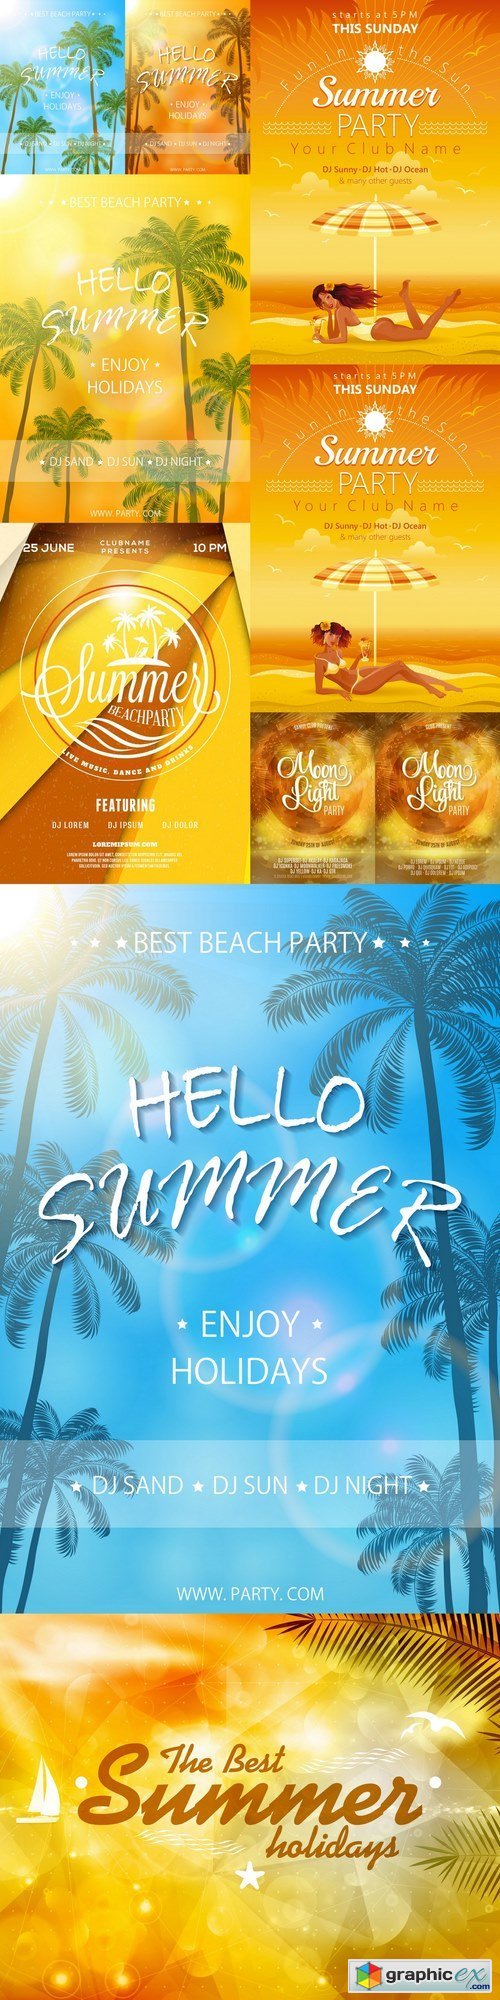 Summer party poster